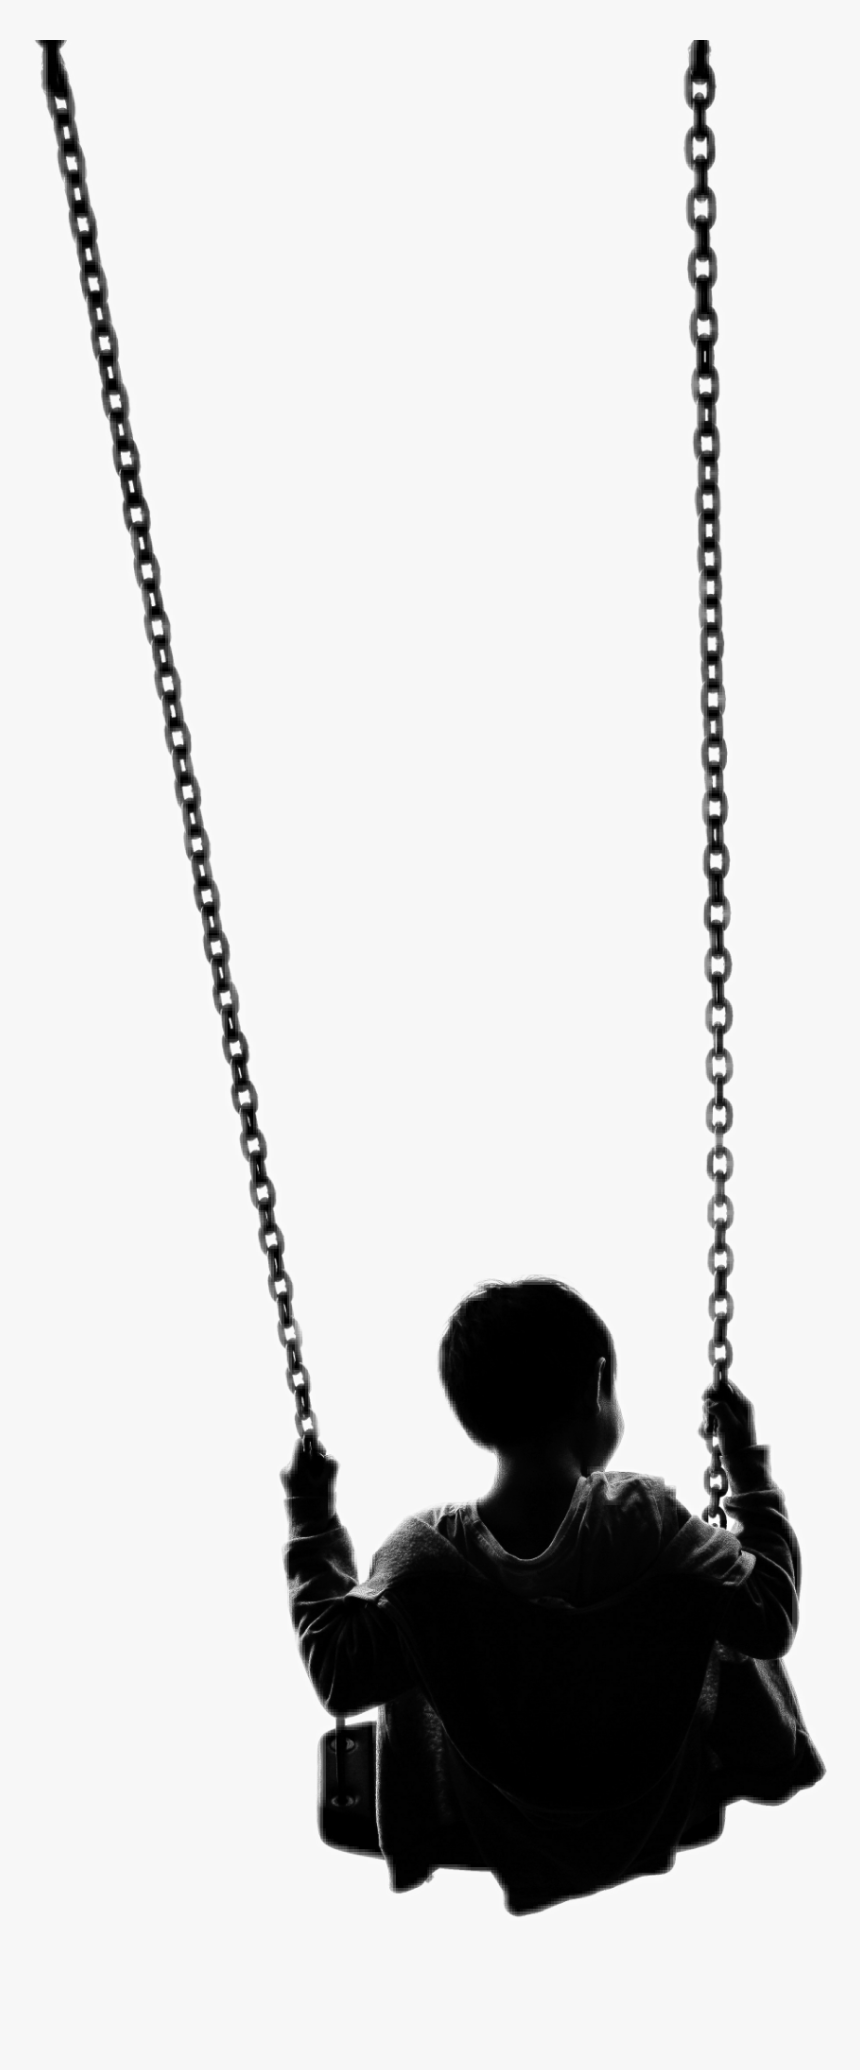 #swing #child #boy #black #chain #chains - Chain Png For Picsart Black, Transparent Png, Free Download